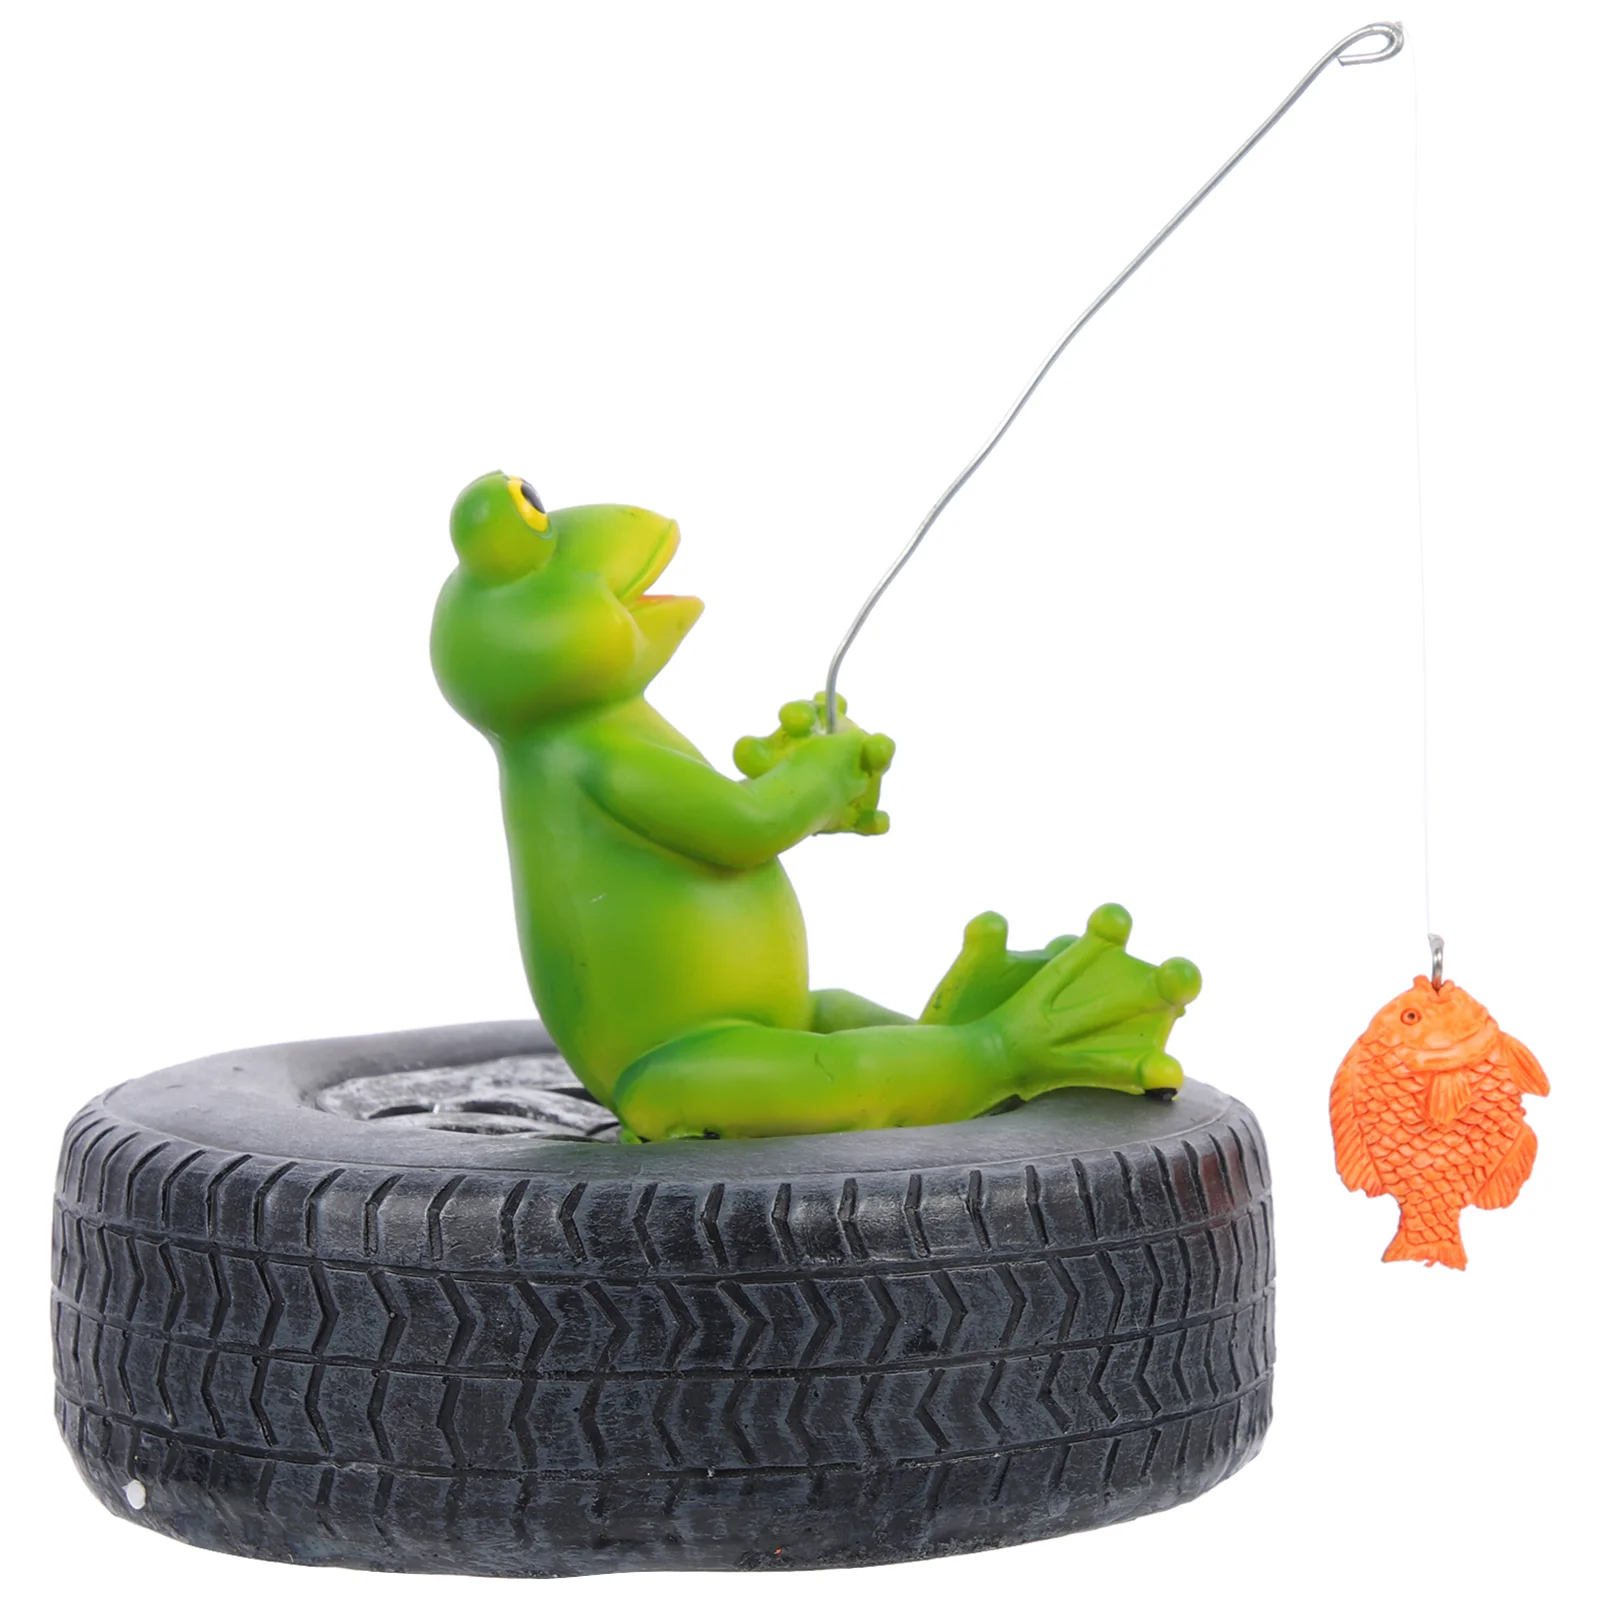 

Frog Floating Resin Frogs Figurine Pond Garden Statue Ornament Decoration Shaped Water Decor